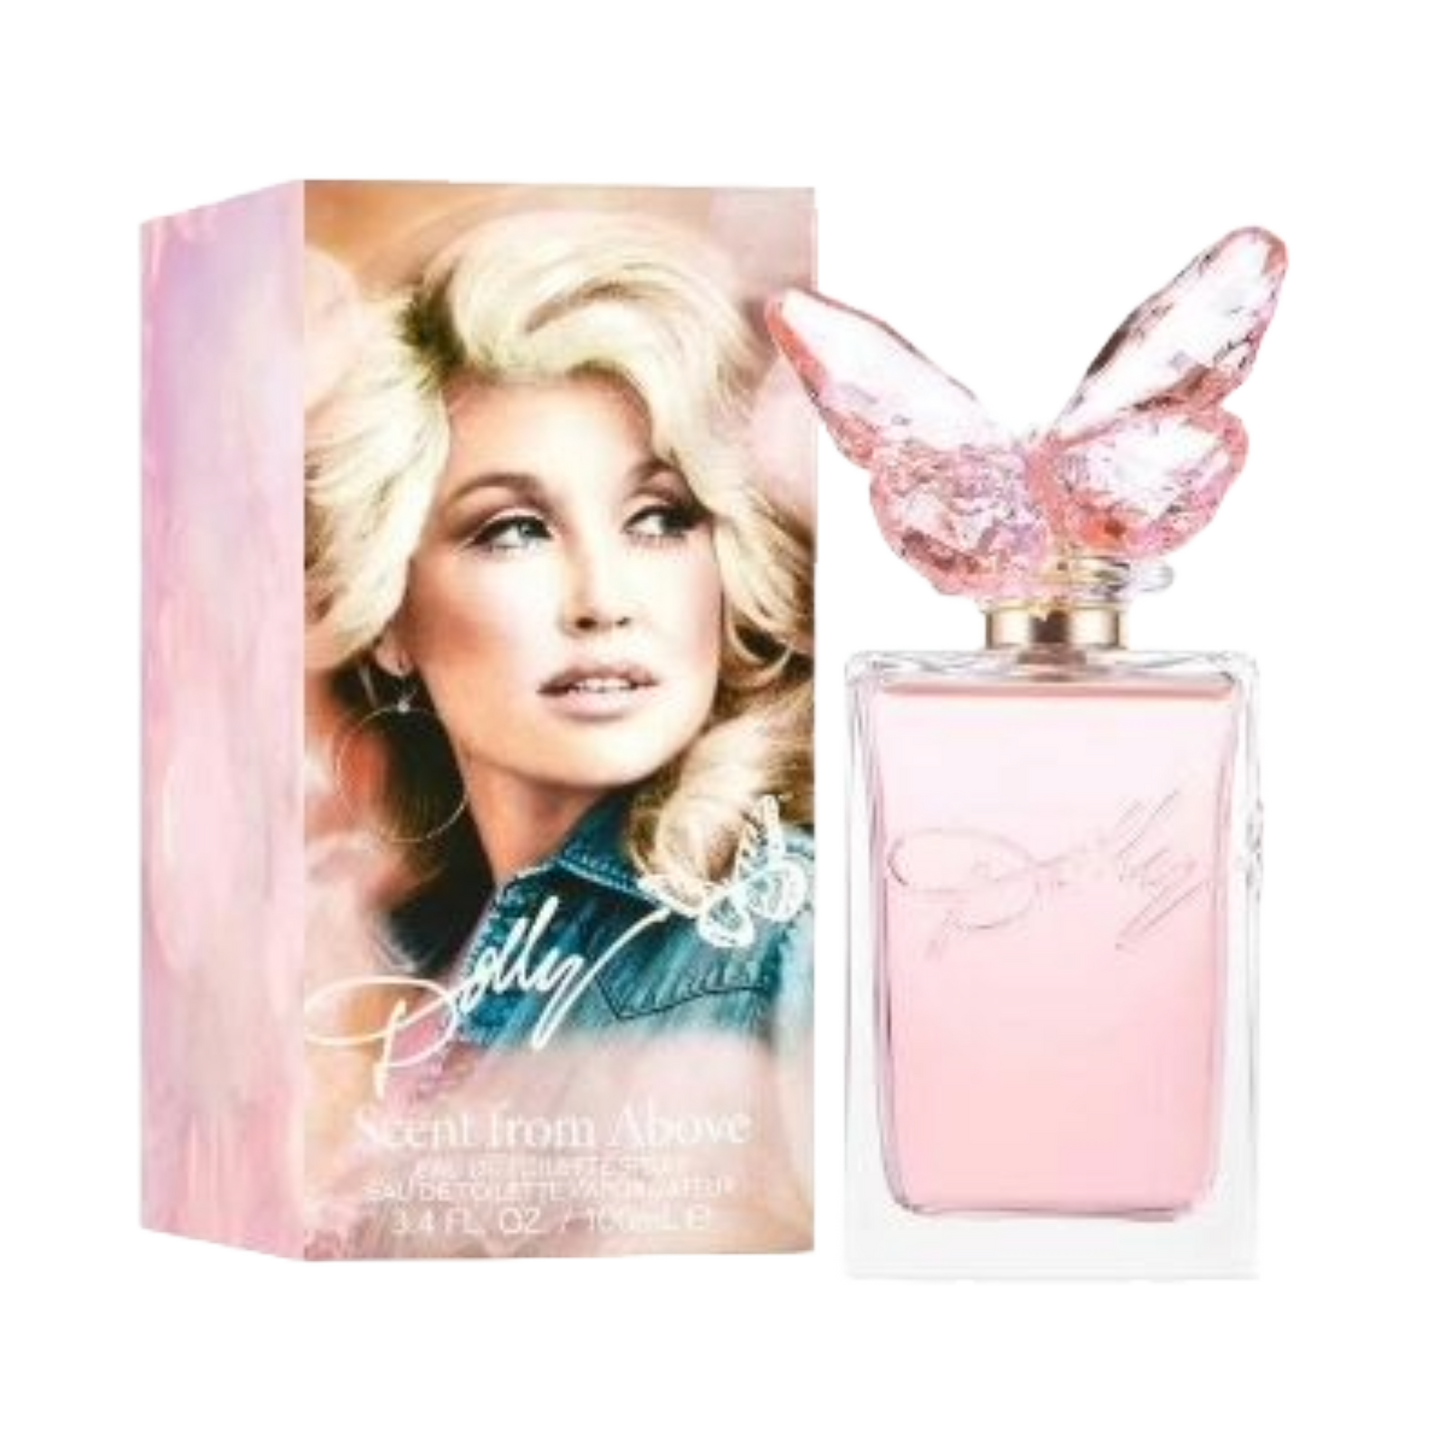 Roper Ladies Dolly Parton Scent From Above 3.4oz Toilette Perfume 03-099-1000-9002